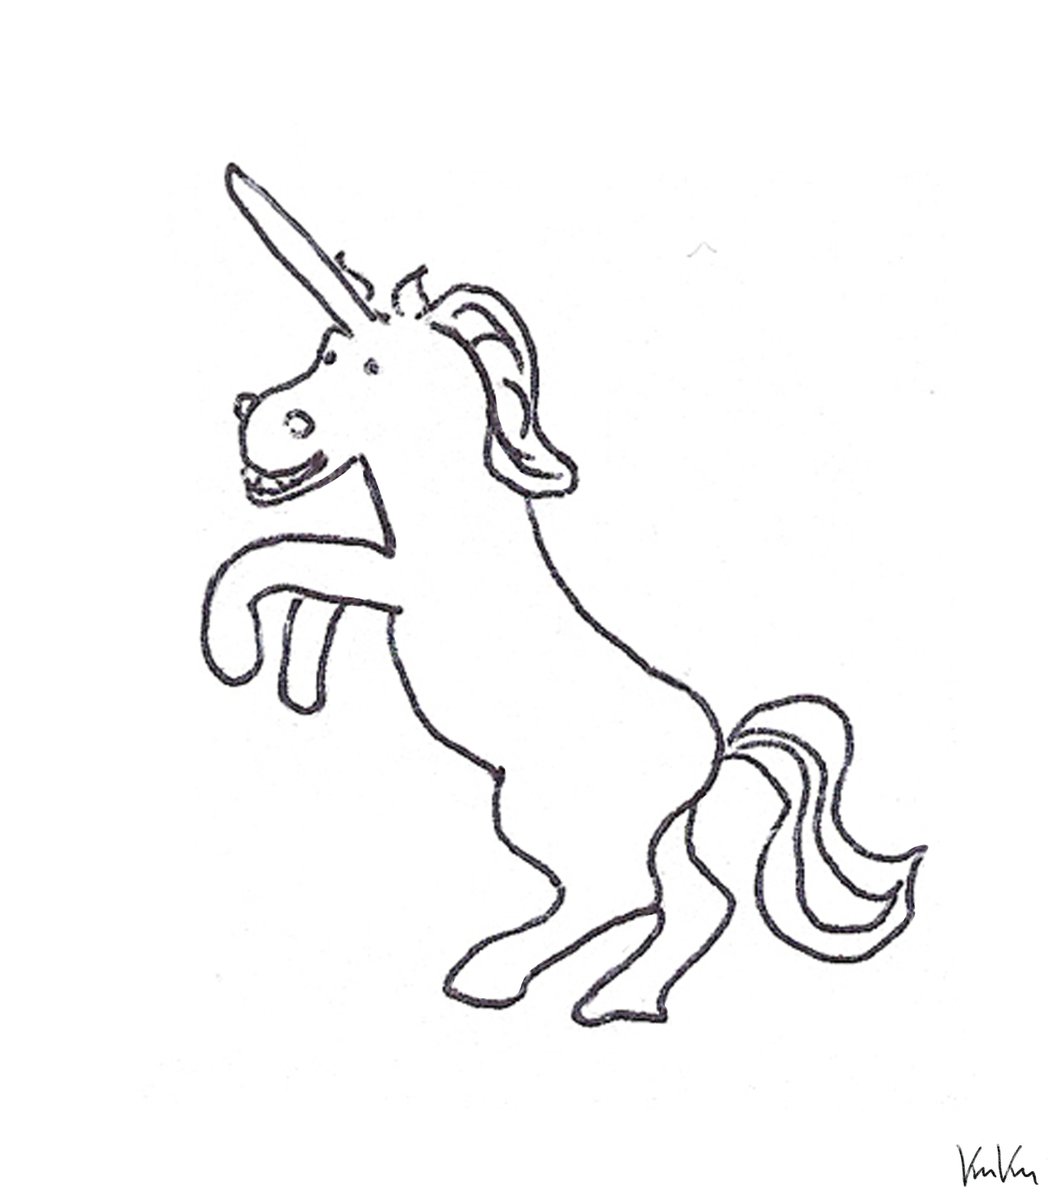 Just found out it's national unicorn day. Ain't she cute?